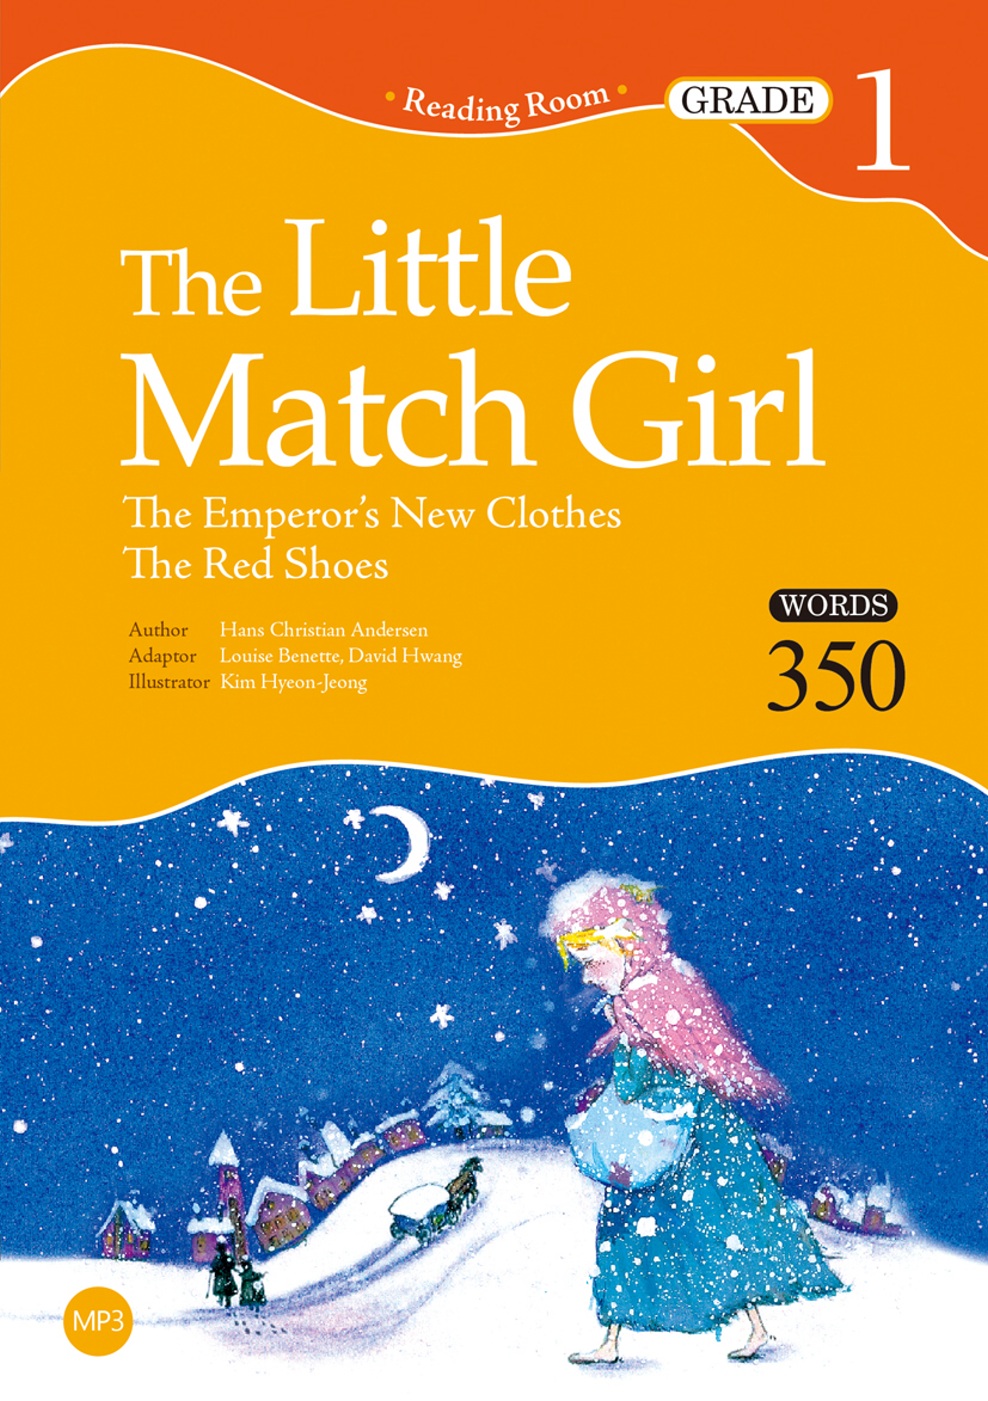 The Little Match Girl：The Emperor’s New Clothes / The Red Shoes【Grade 1】（25K+1MP3）